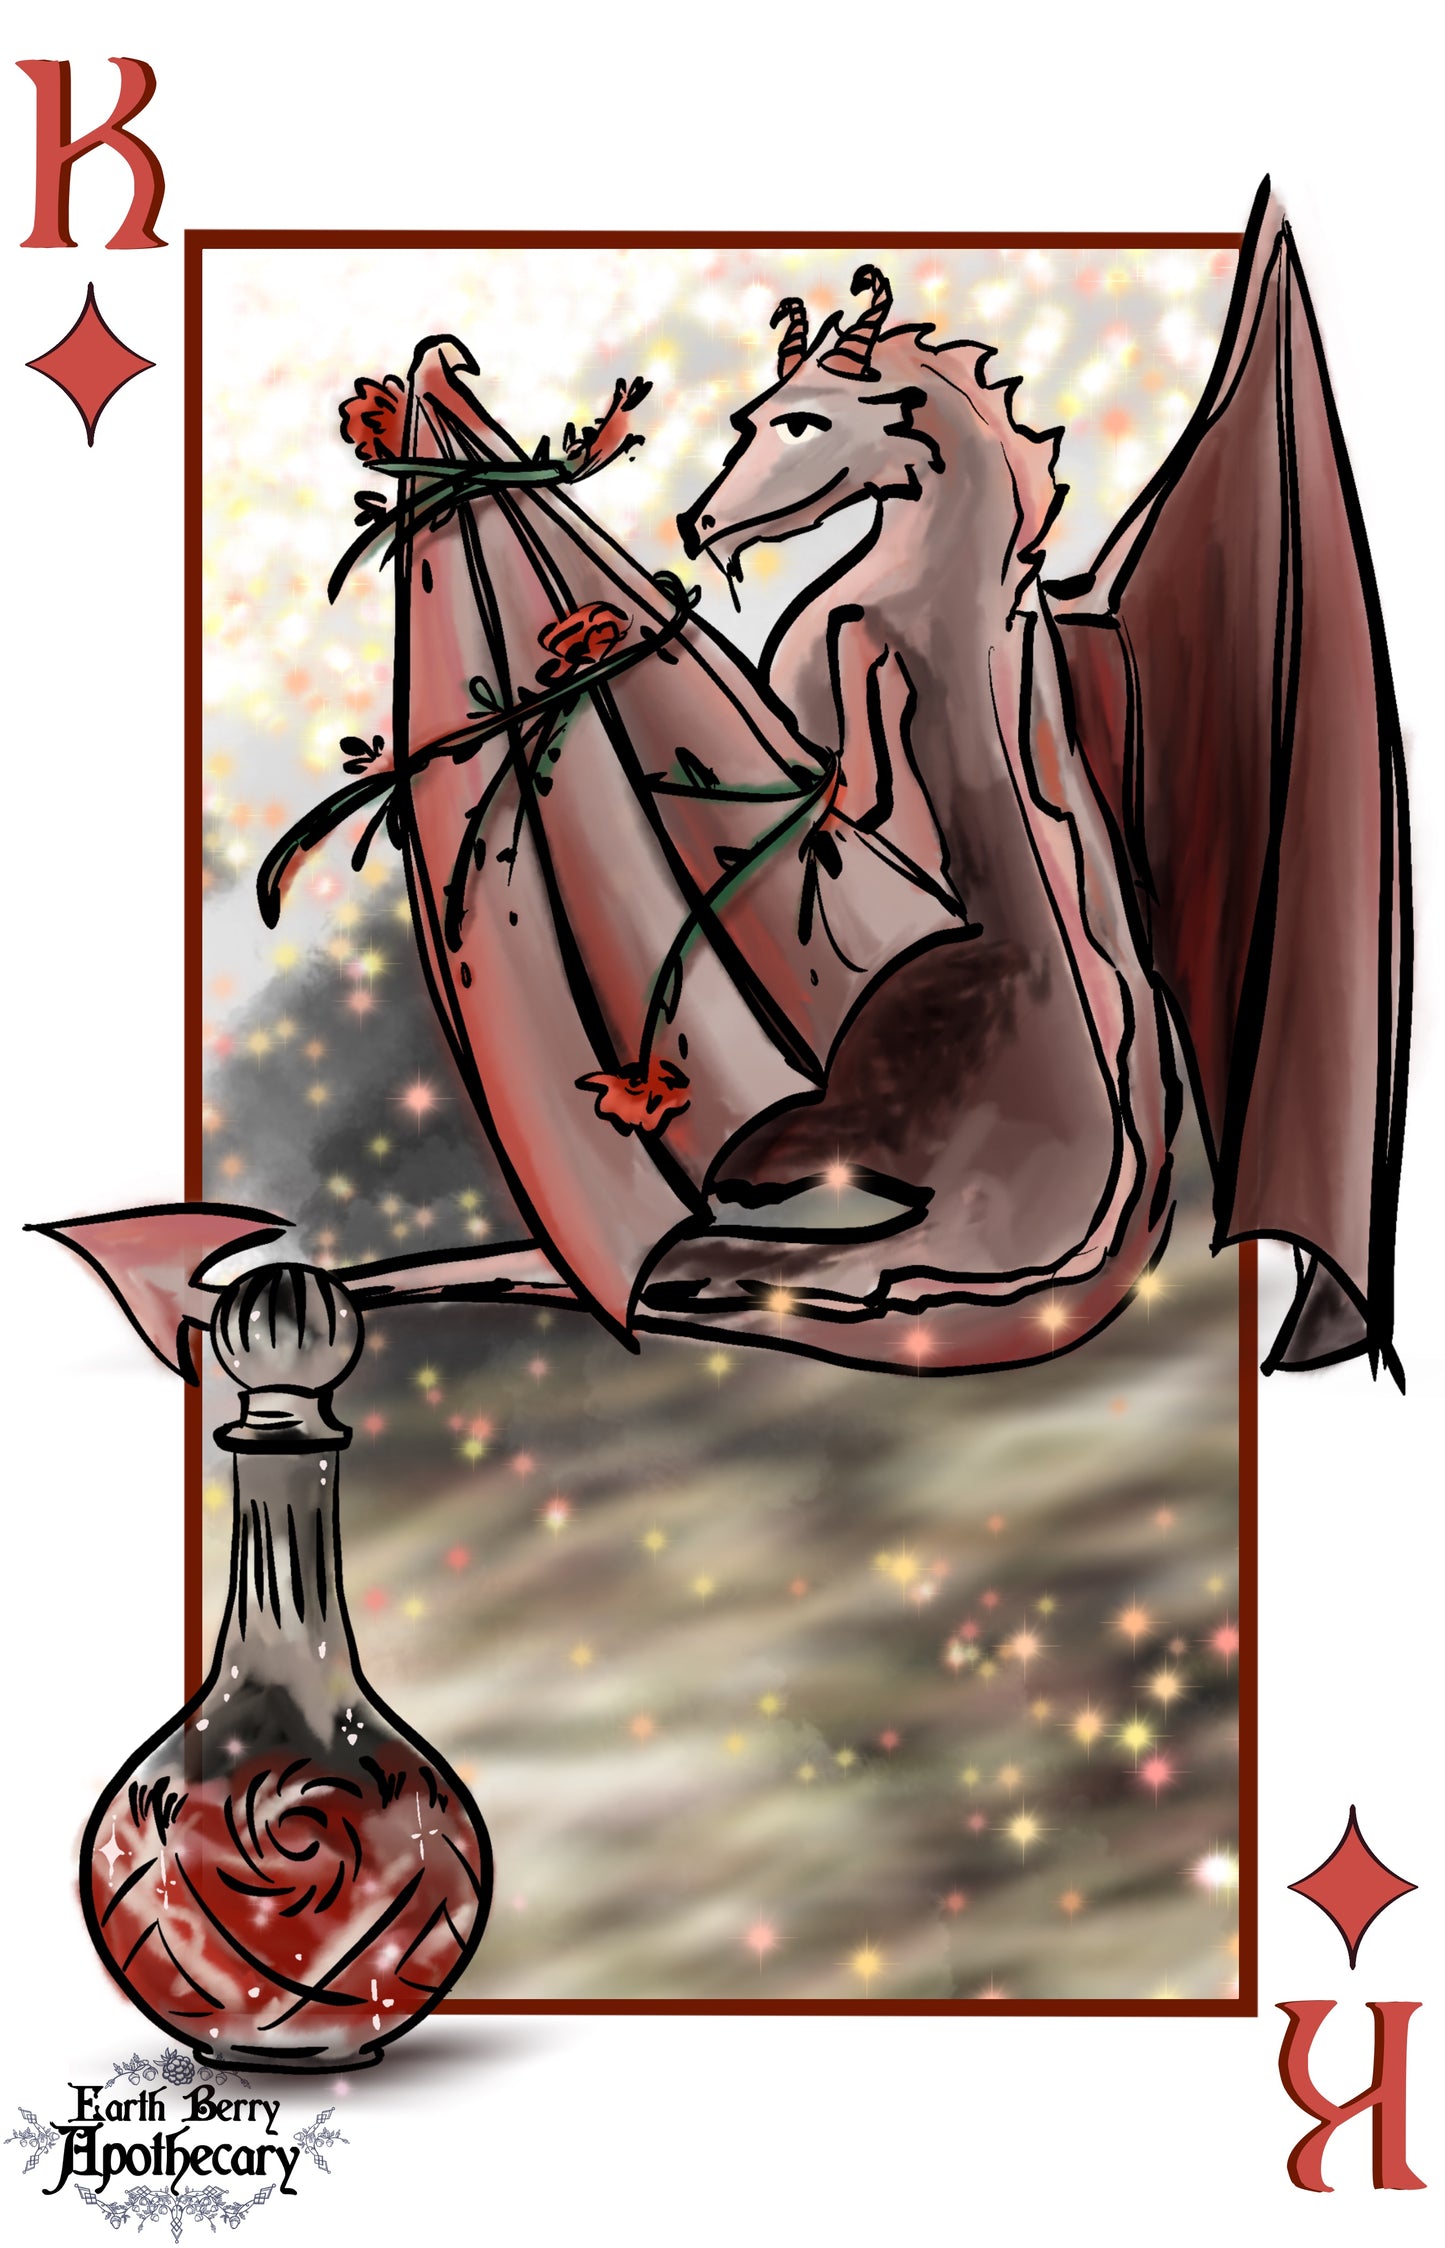 Fantasy themed playing cards. King of diamond playing card is a dragon sparkling with treasure. A potion in a crystal decanter sits in the foreground.